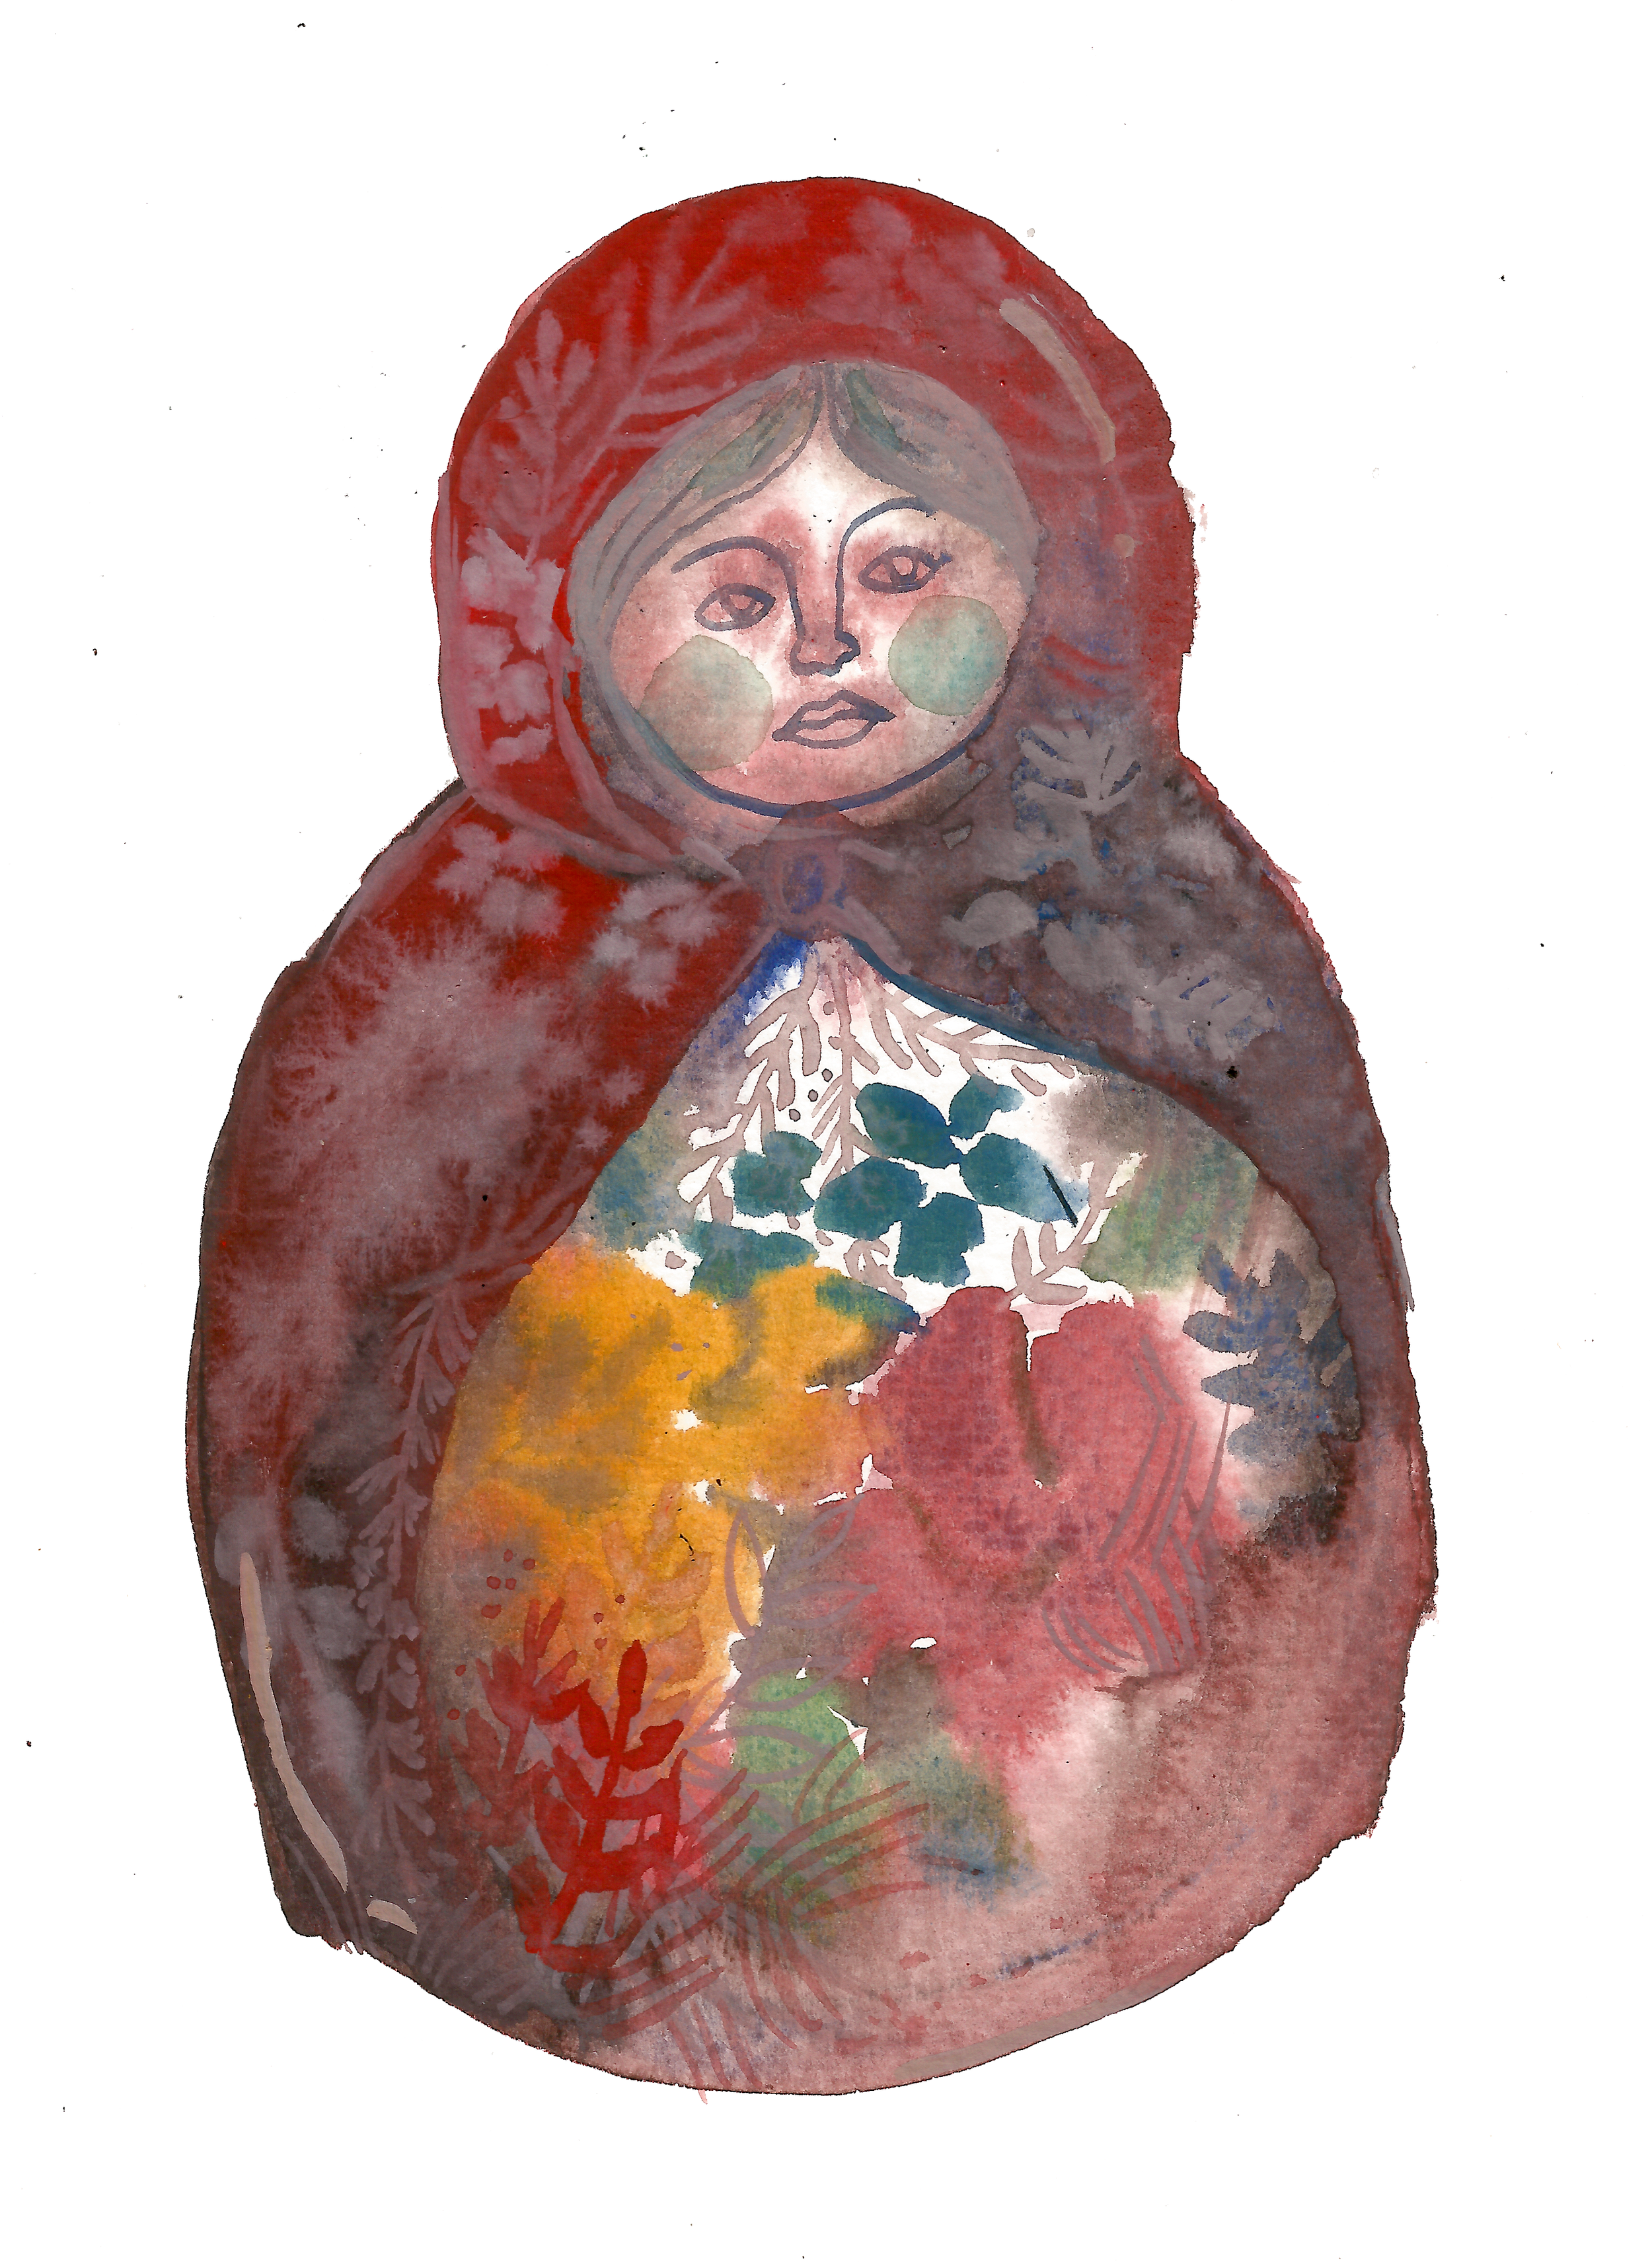 "i carry within me every age, every version of myself that I’ve ever been" (matryoshka)